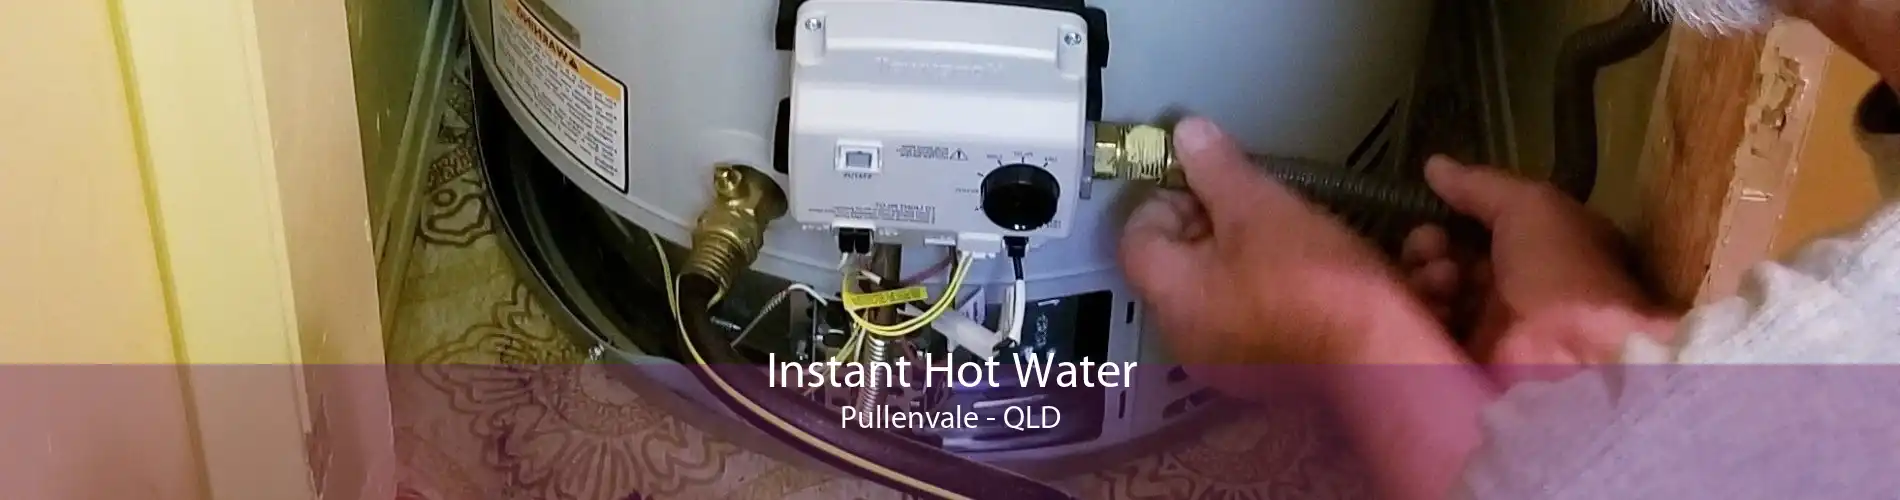 Instant Hot Water Pullenvale - QLD